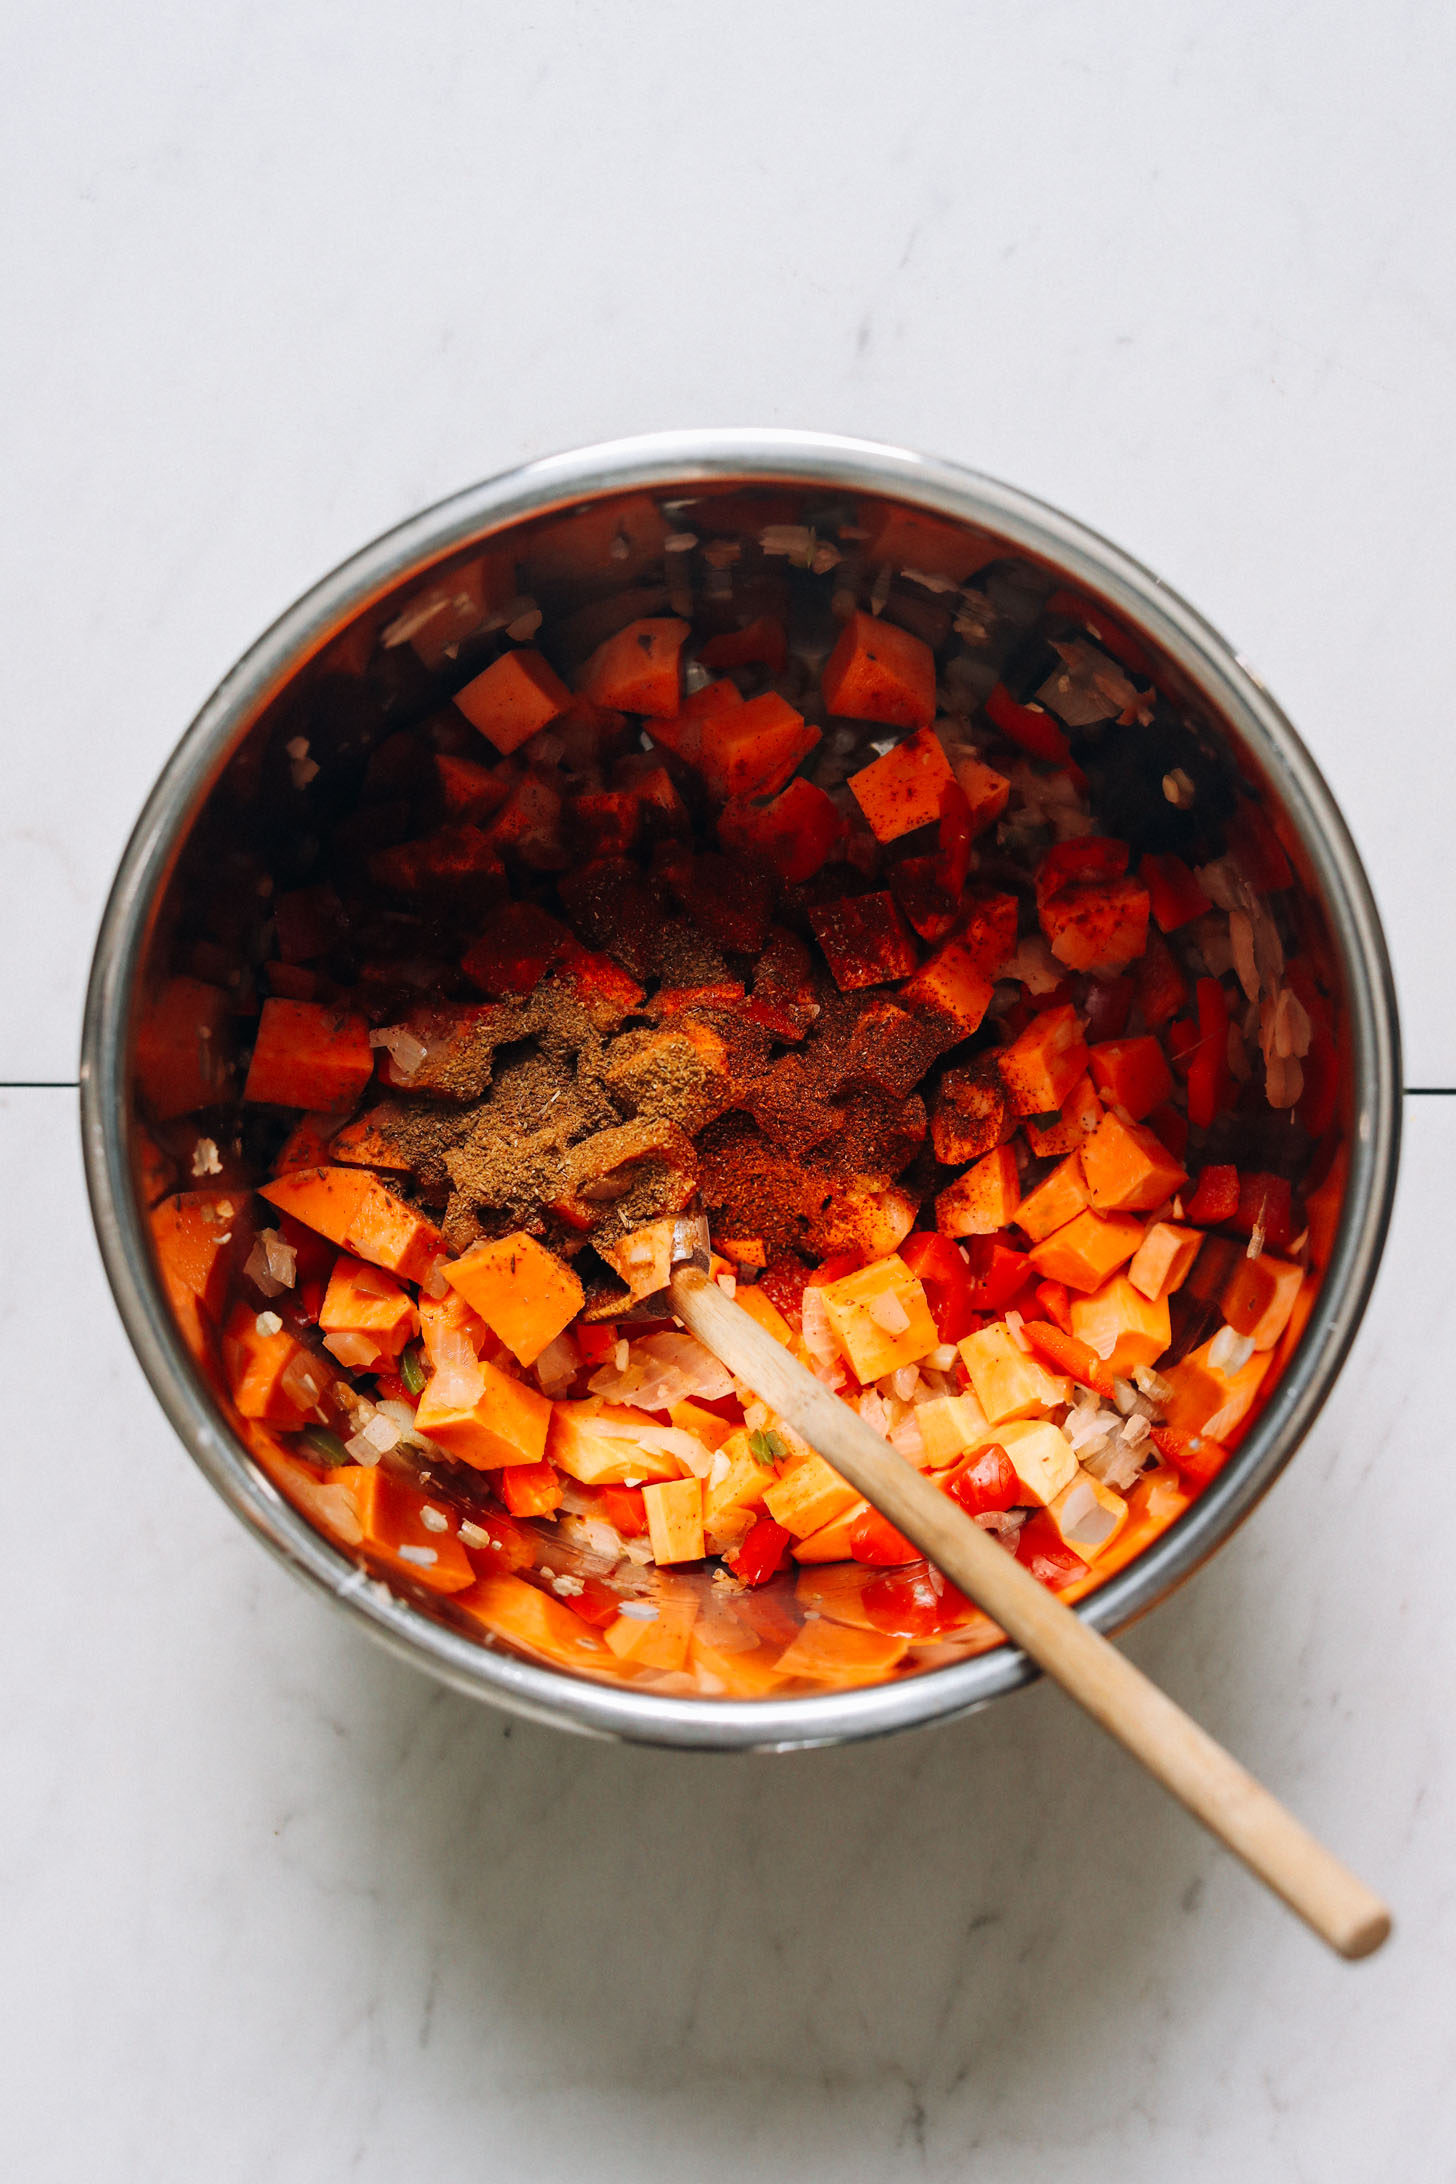 Spices, sweet potato, onion, garlic, and peppers in an Instant Pot